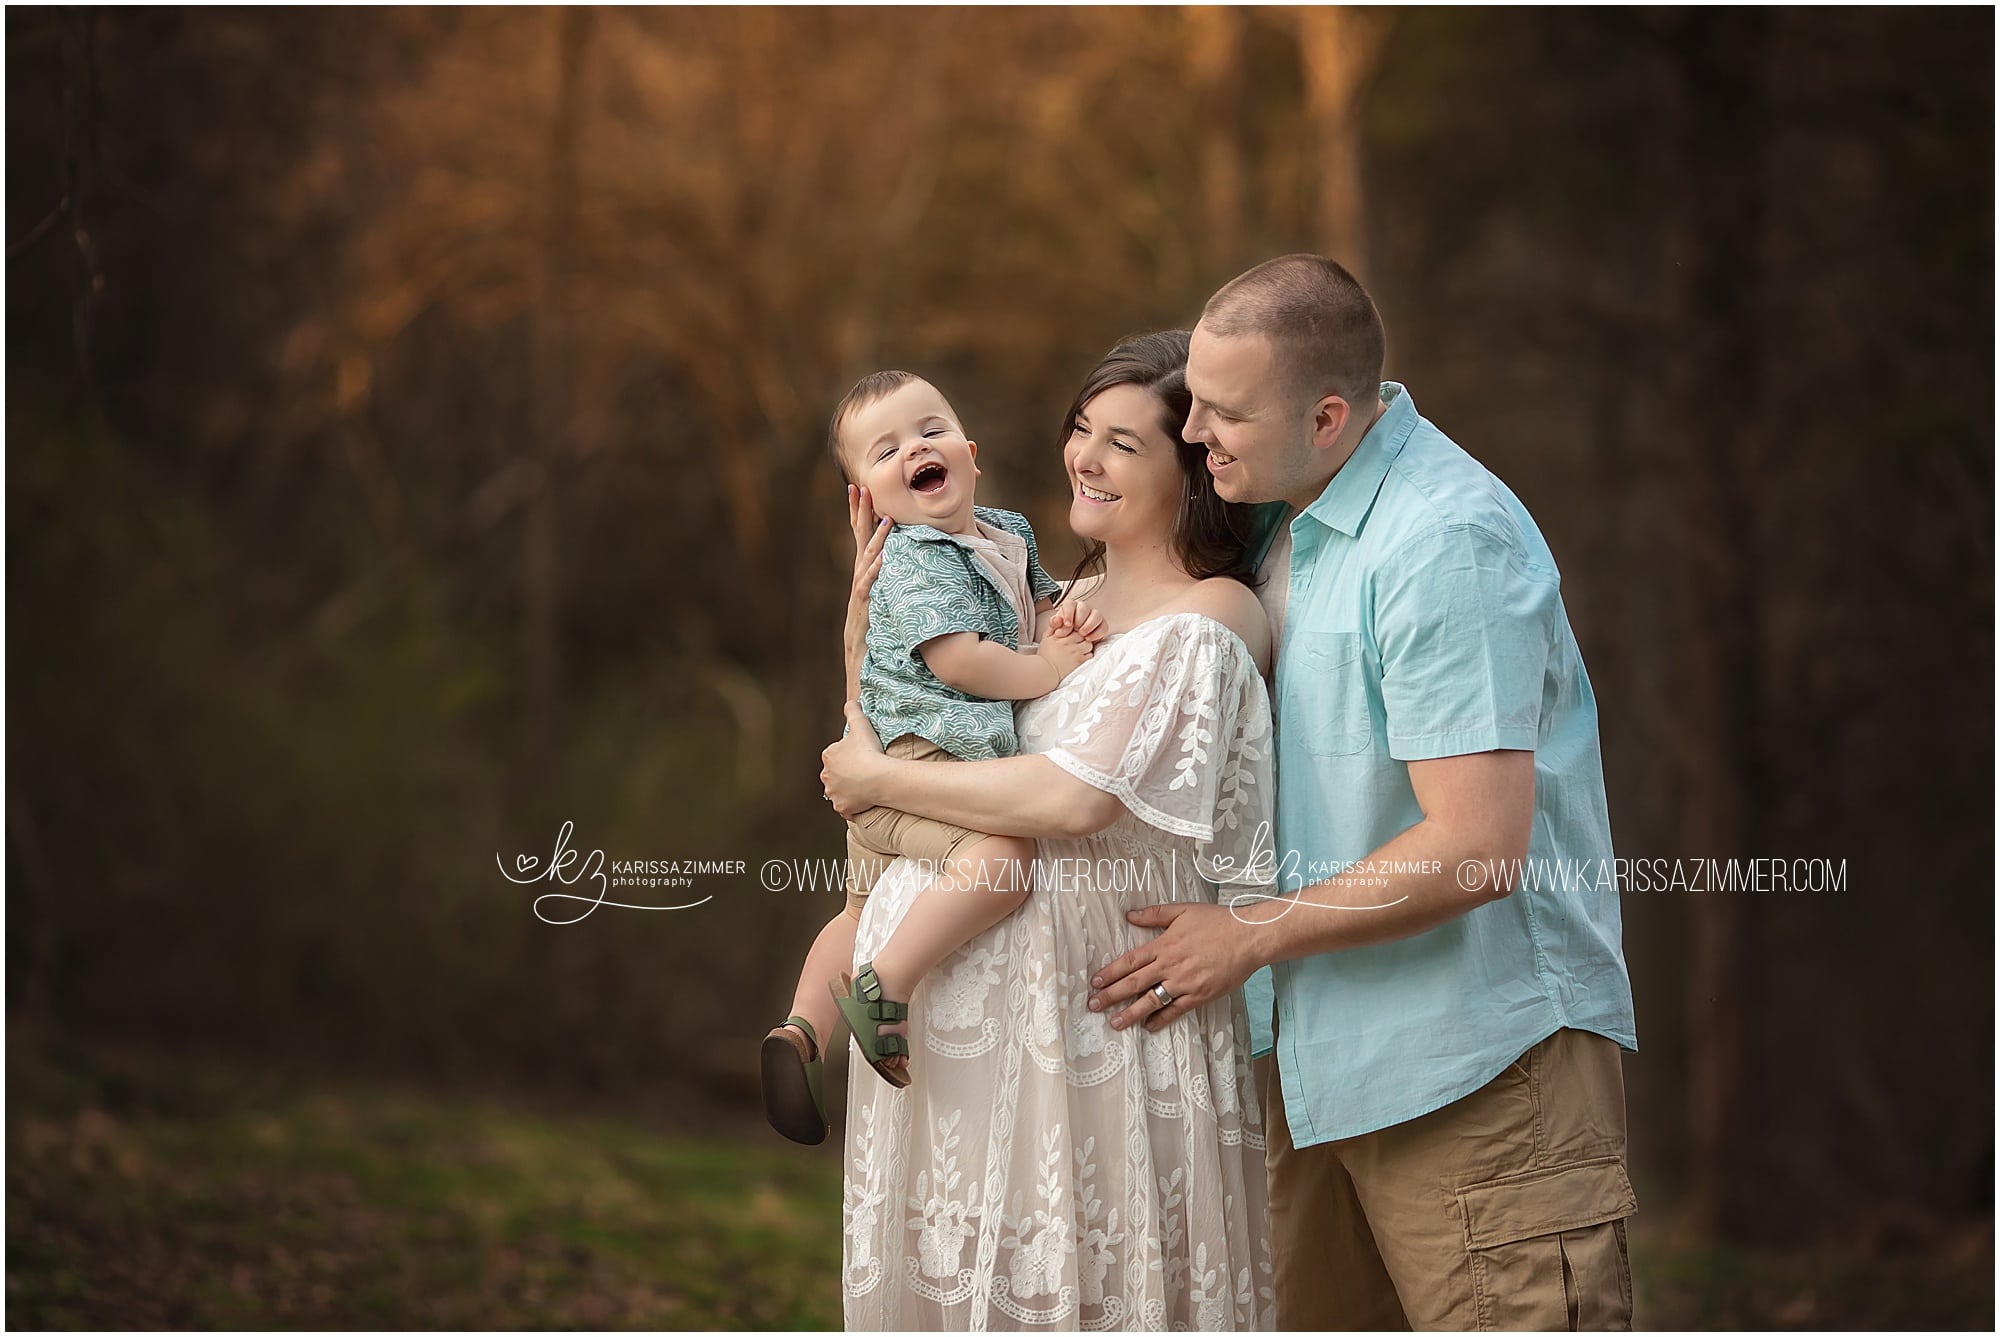 Camp Hill Pa Family and Maternity Photographer captures a family together at their outdoor maternity photography session